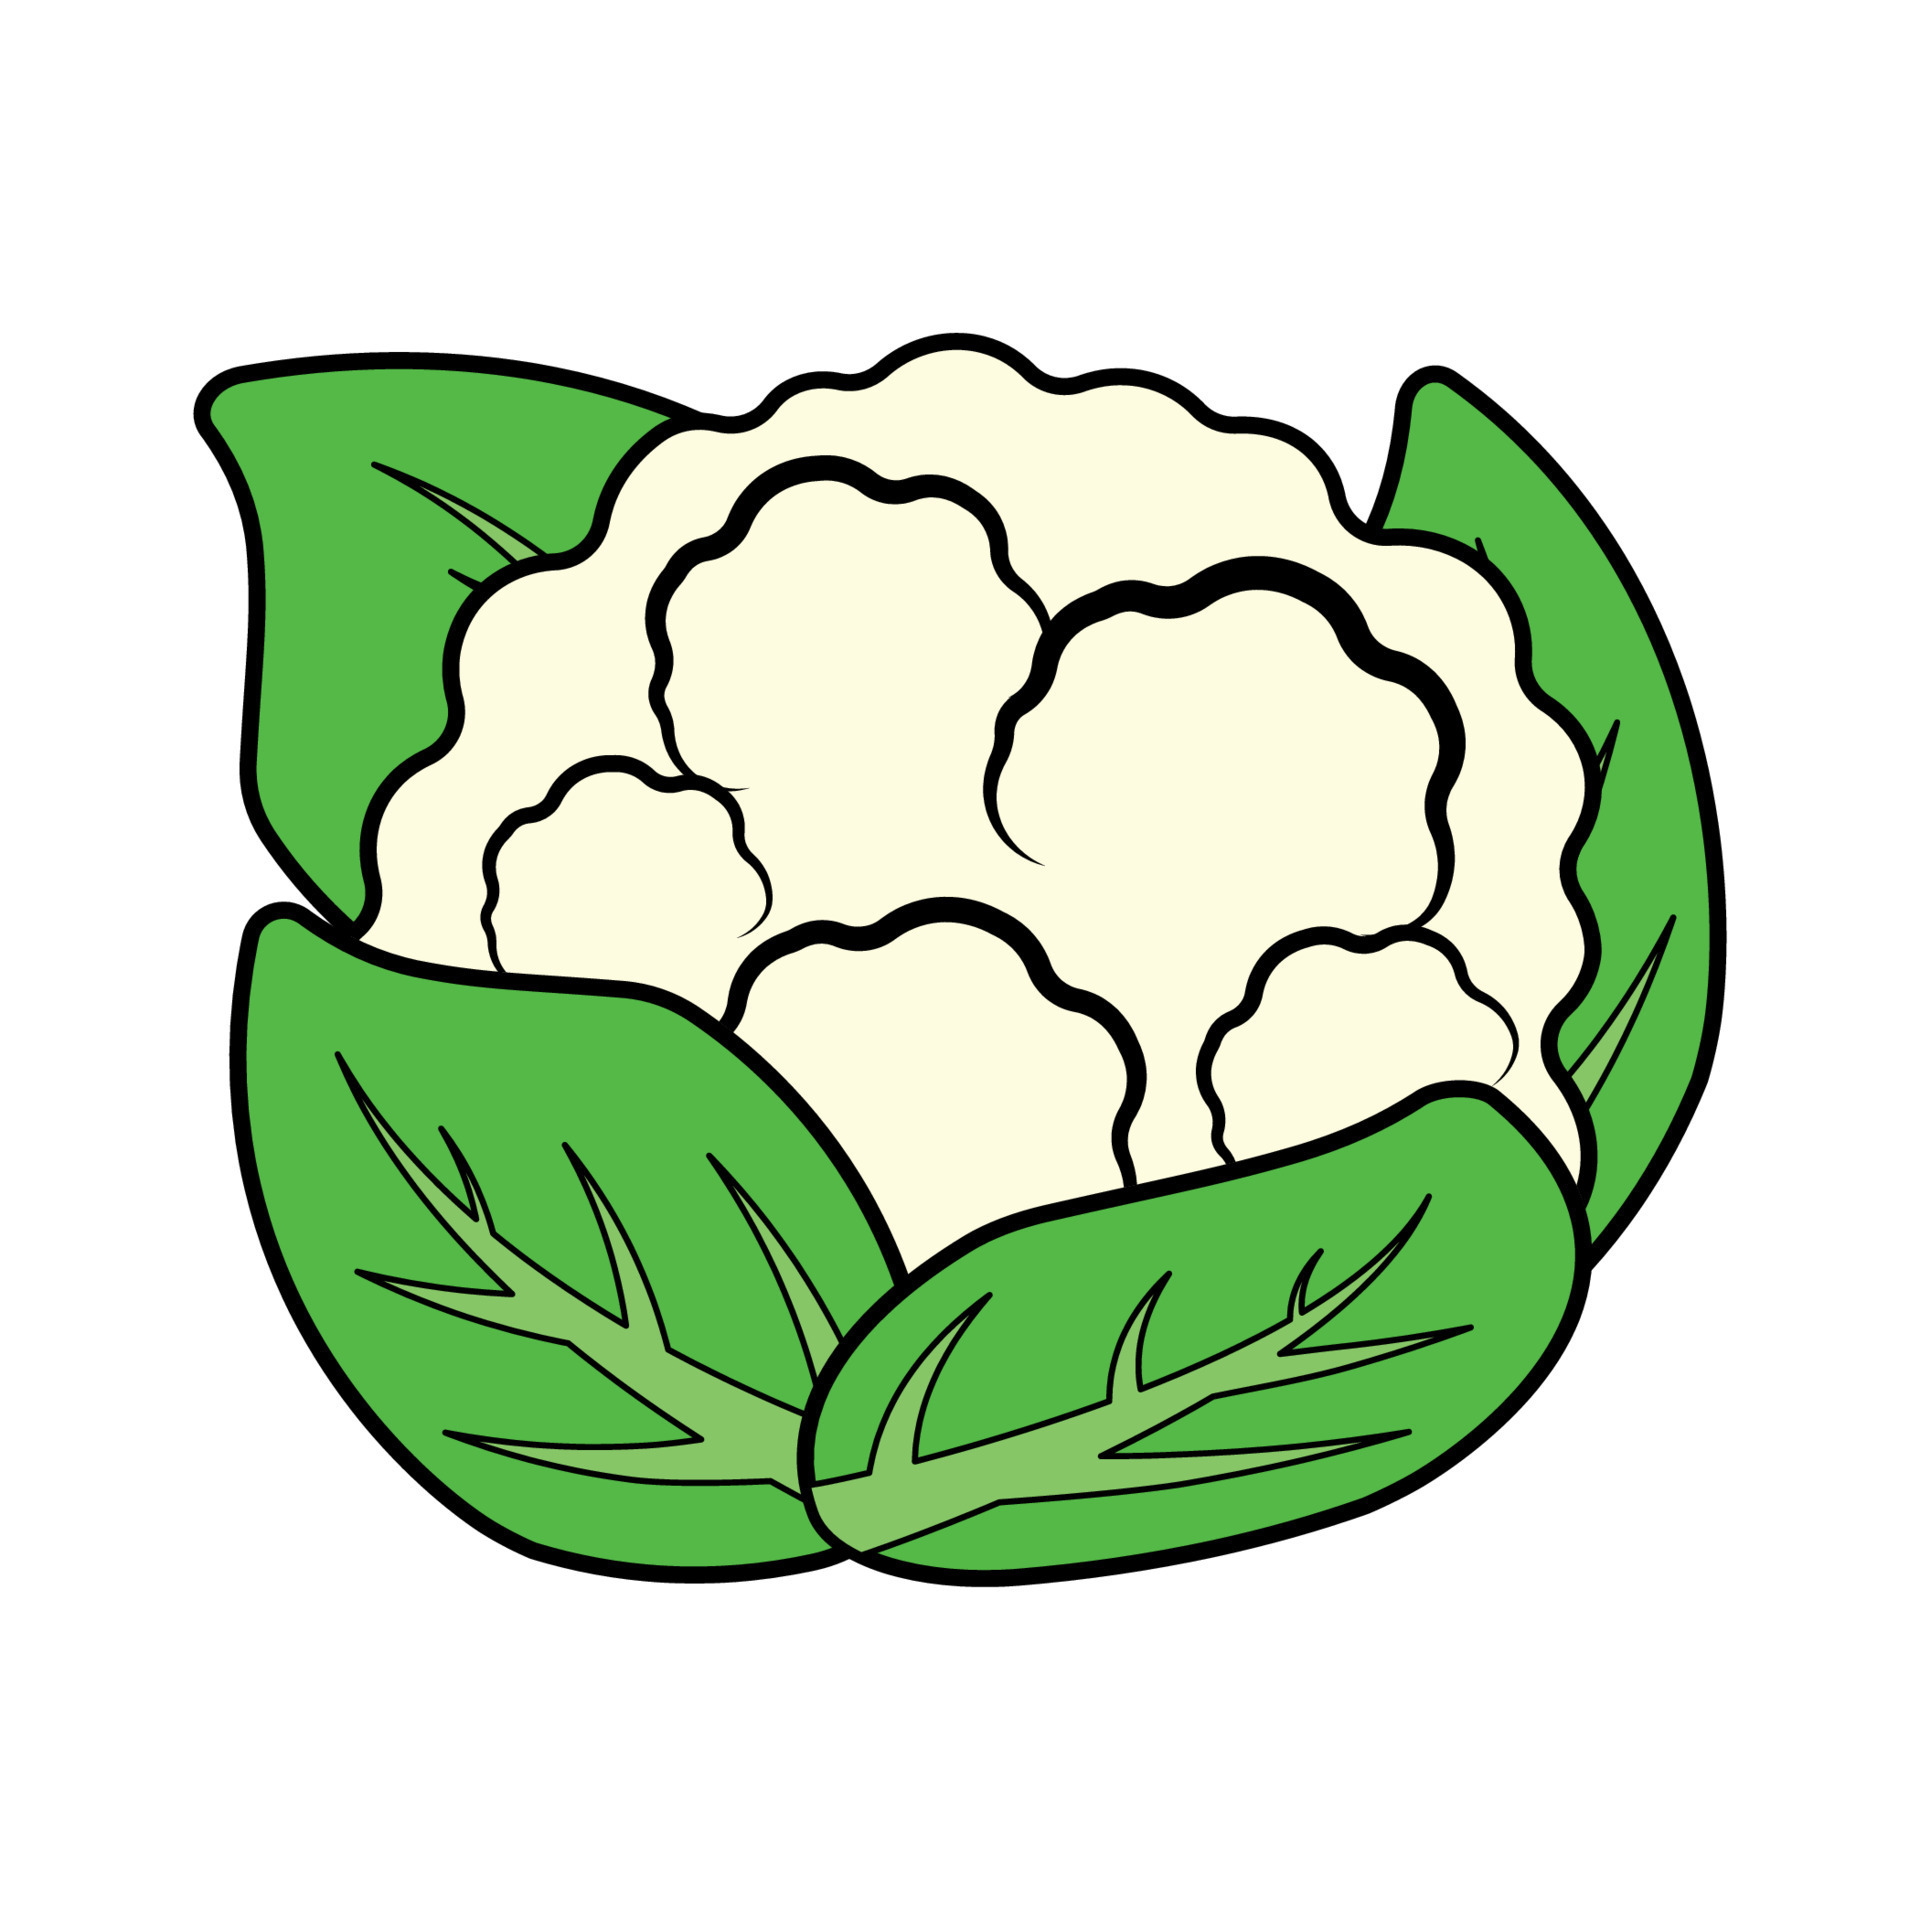 Sketch Of A Cauliflower. Hand-drawn Lineart Look Illustration Stock Photo,  Picture and Royalty Free Image. Image 5476789.